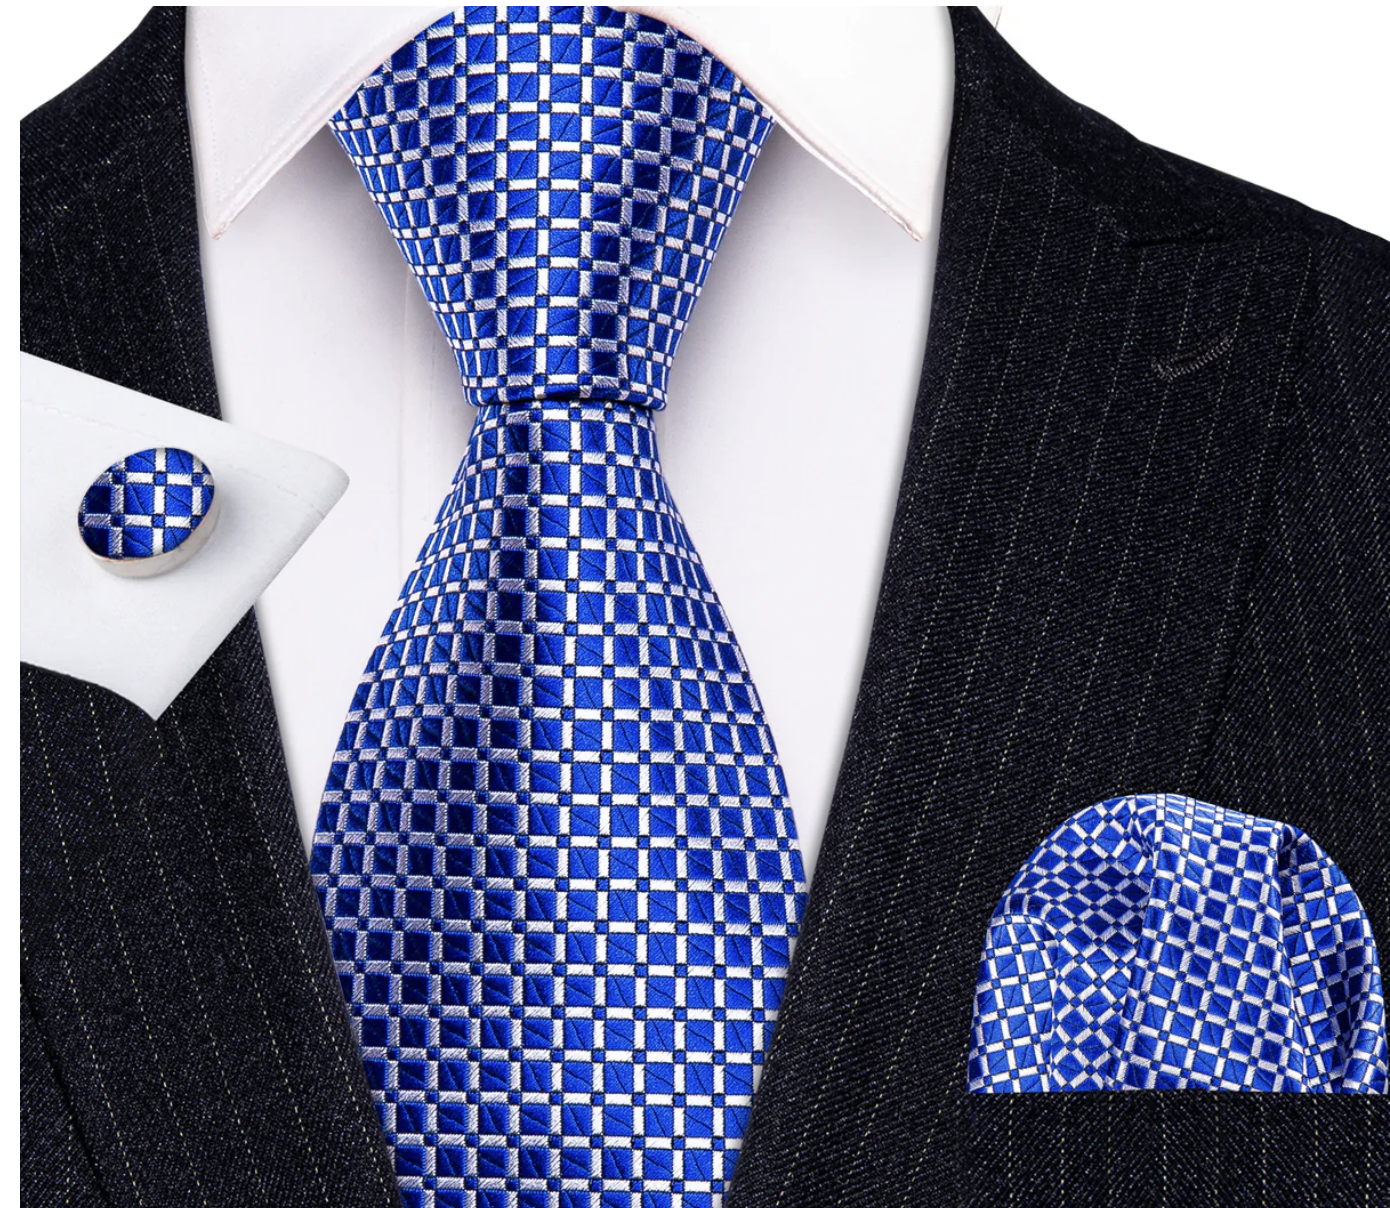 Plaid Ties: Adding a Touch of Classic Style to Your Wardrobe